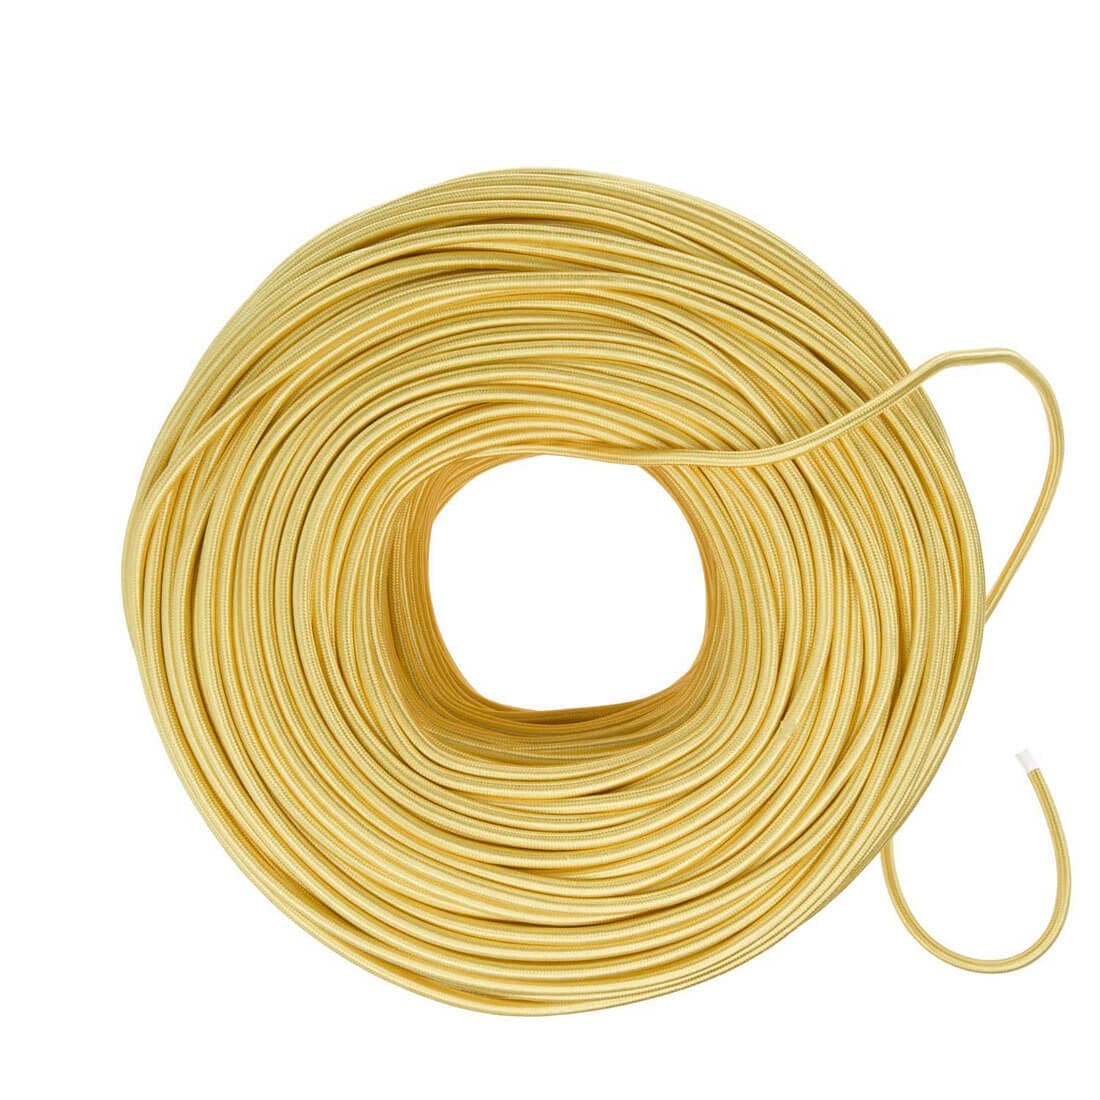 SINGLE-CONDUCTOR 18-GAUGE GOLD RAYON WIRE